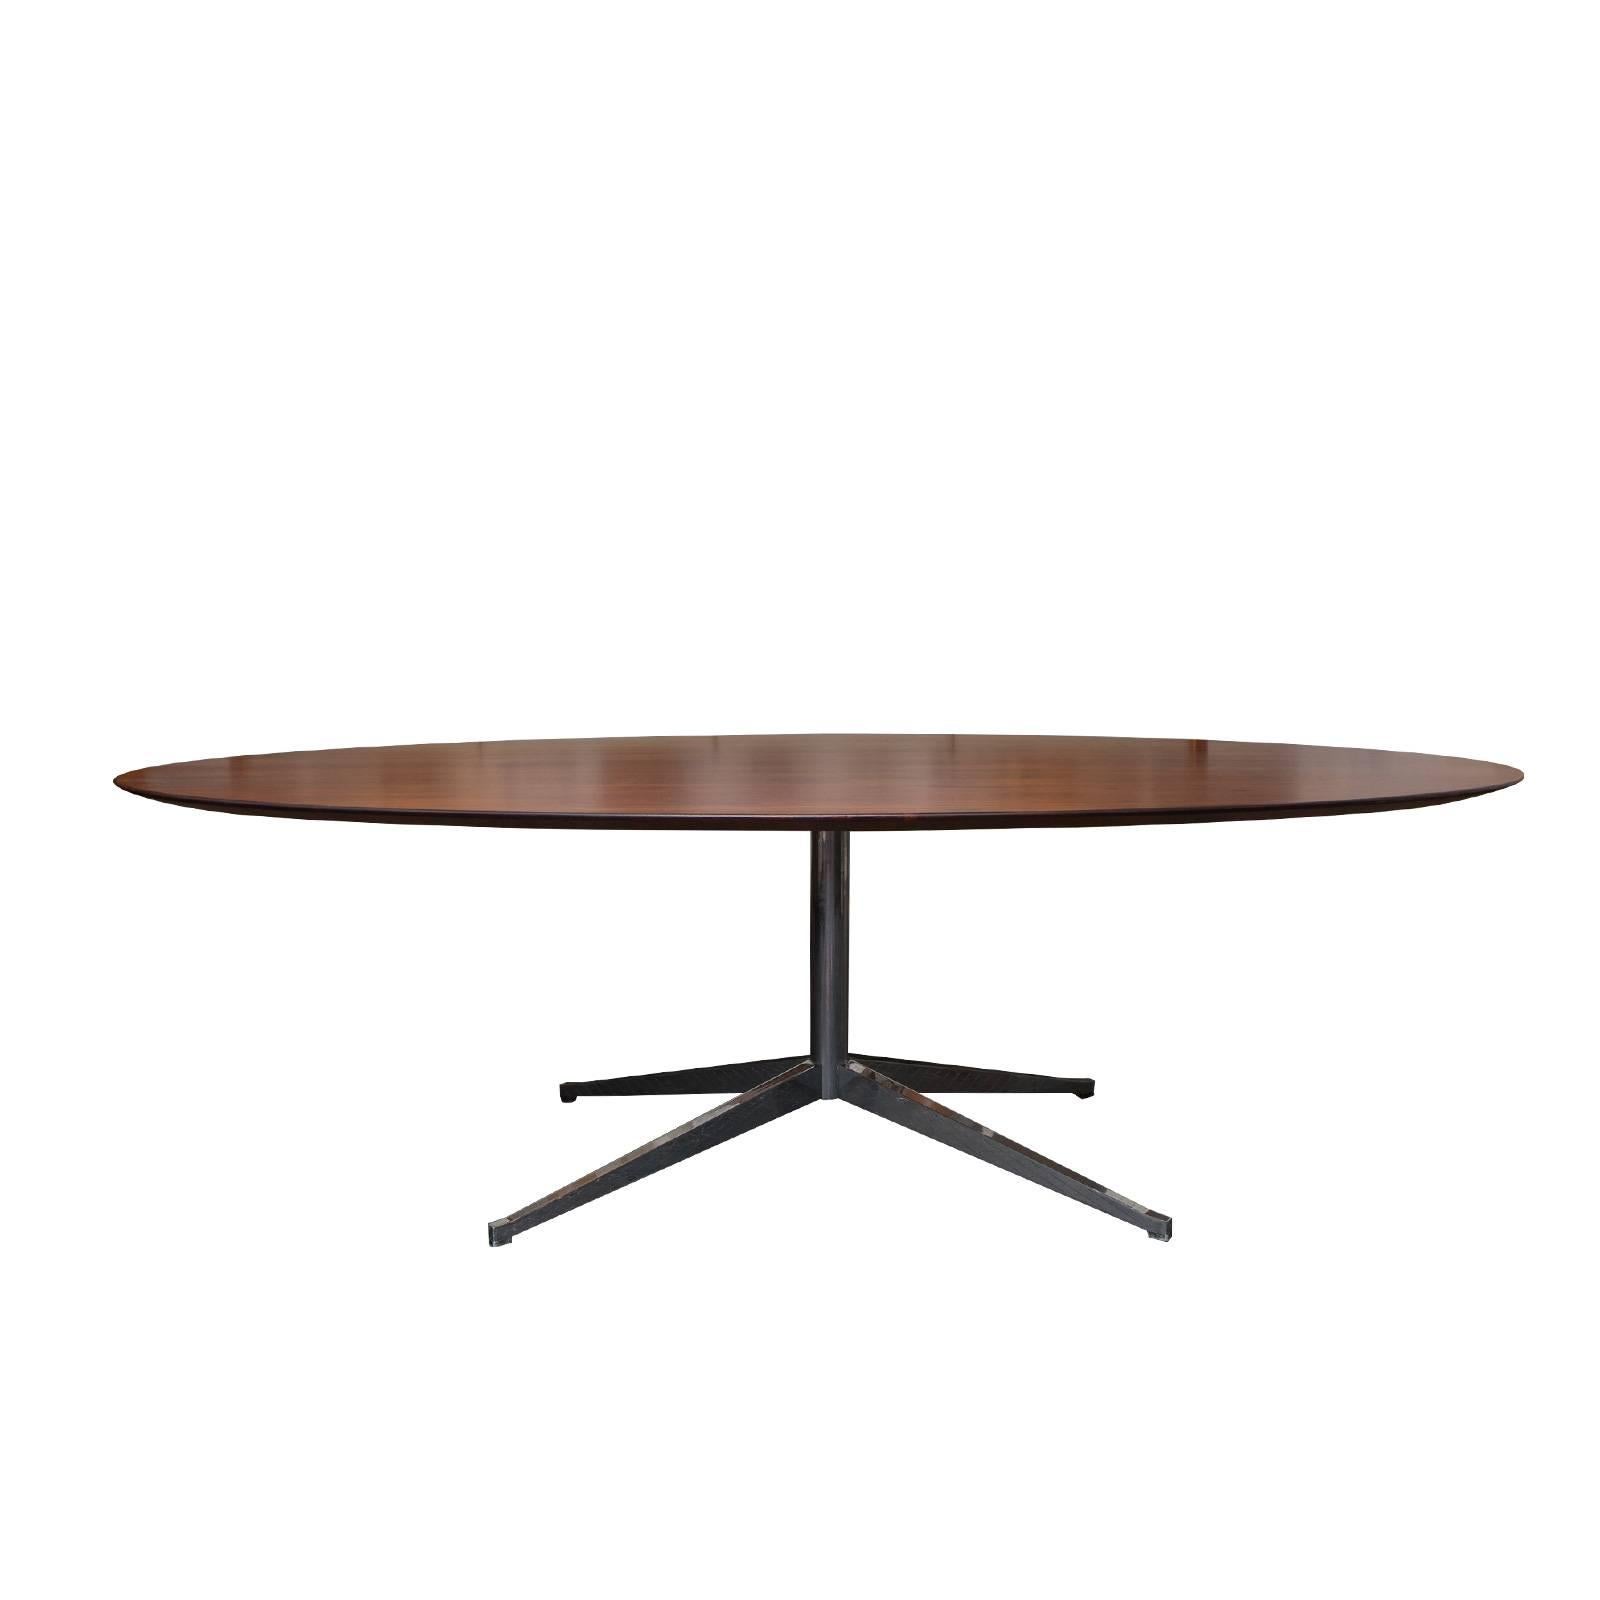 Beautifully figured rosewood oval dining table, mfg. Knoll-1960s.